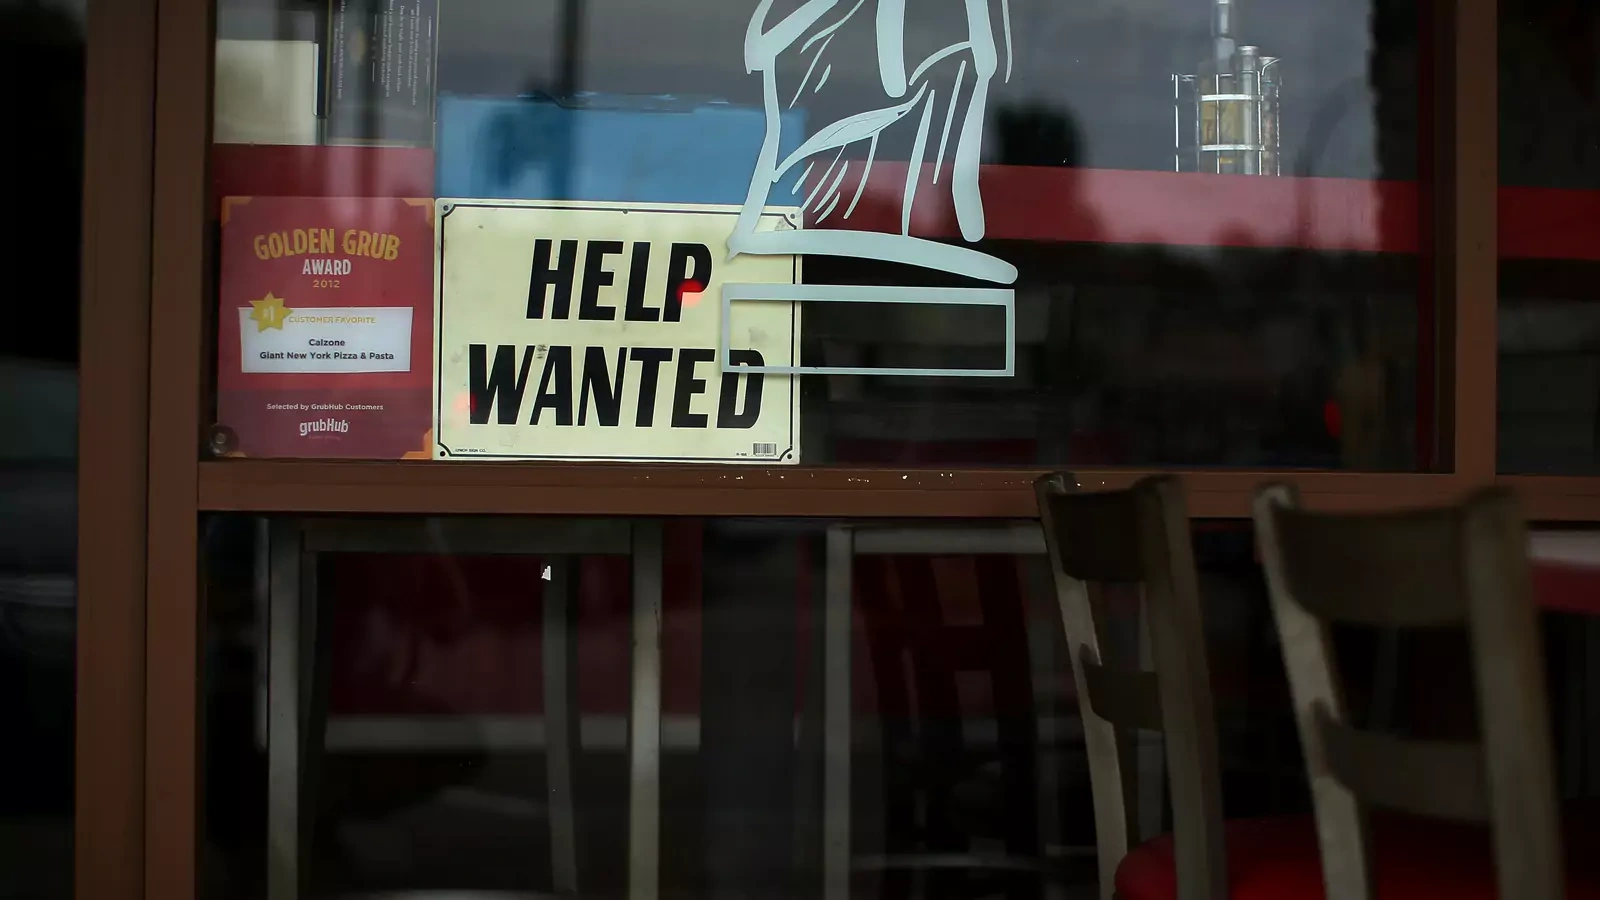 A local pizza restaurant advertises for workers in Encinitas, California, U.S.